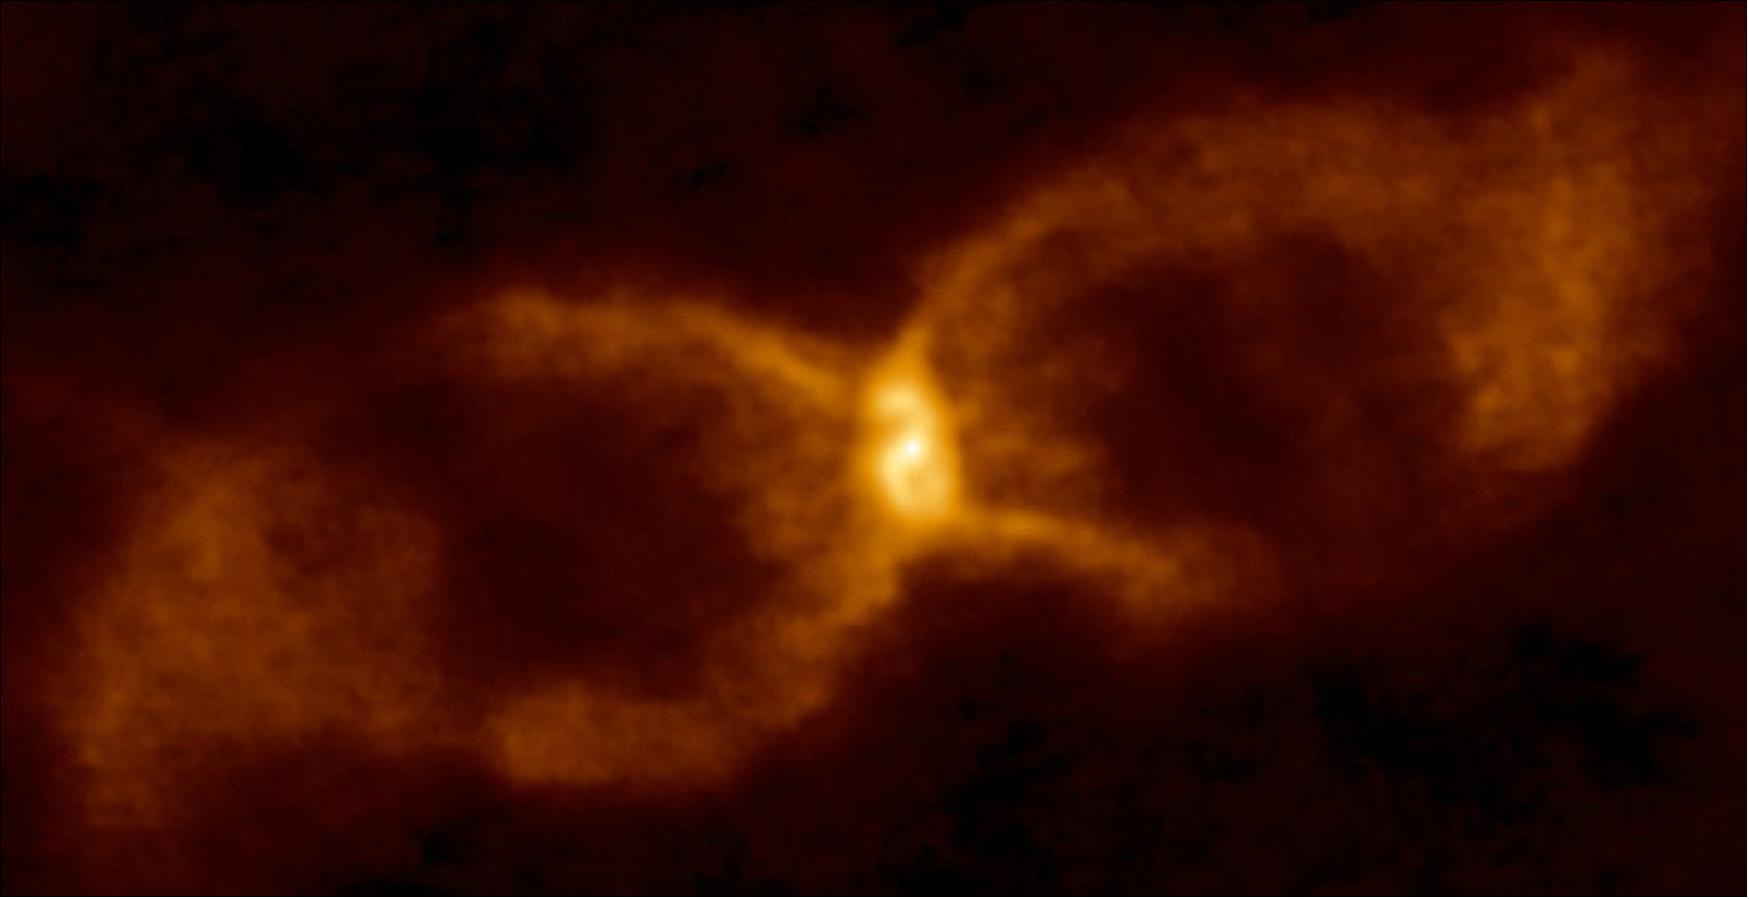 Figure 14: ALMA image of CK Vulpeculae. New research indicates that this hourglass-like object is the result of the collision of a brown dwarf and a white dwarf (image credit: ALMA (ESO/NAOJ/NRAO)/S. P. S. Eyres)